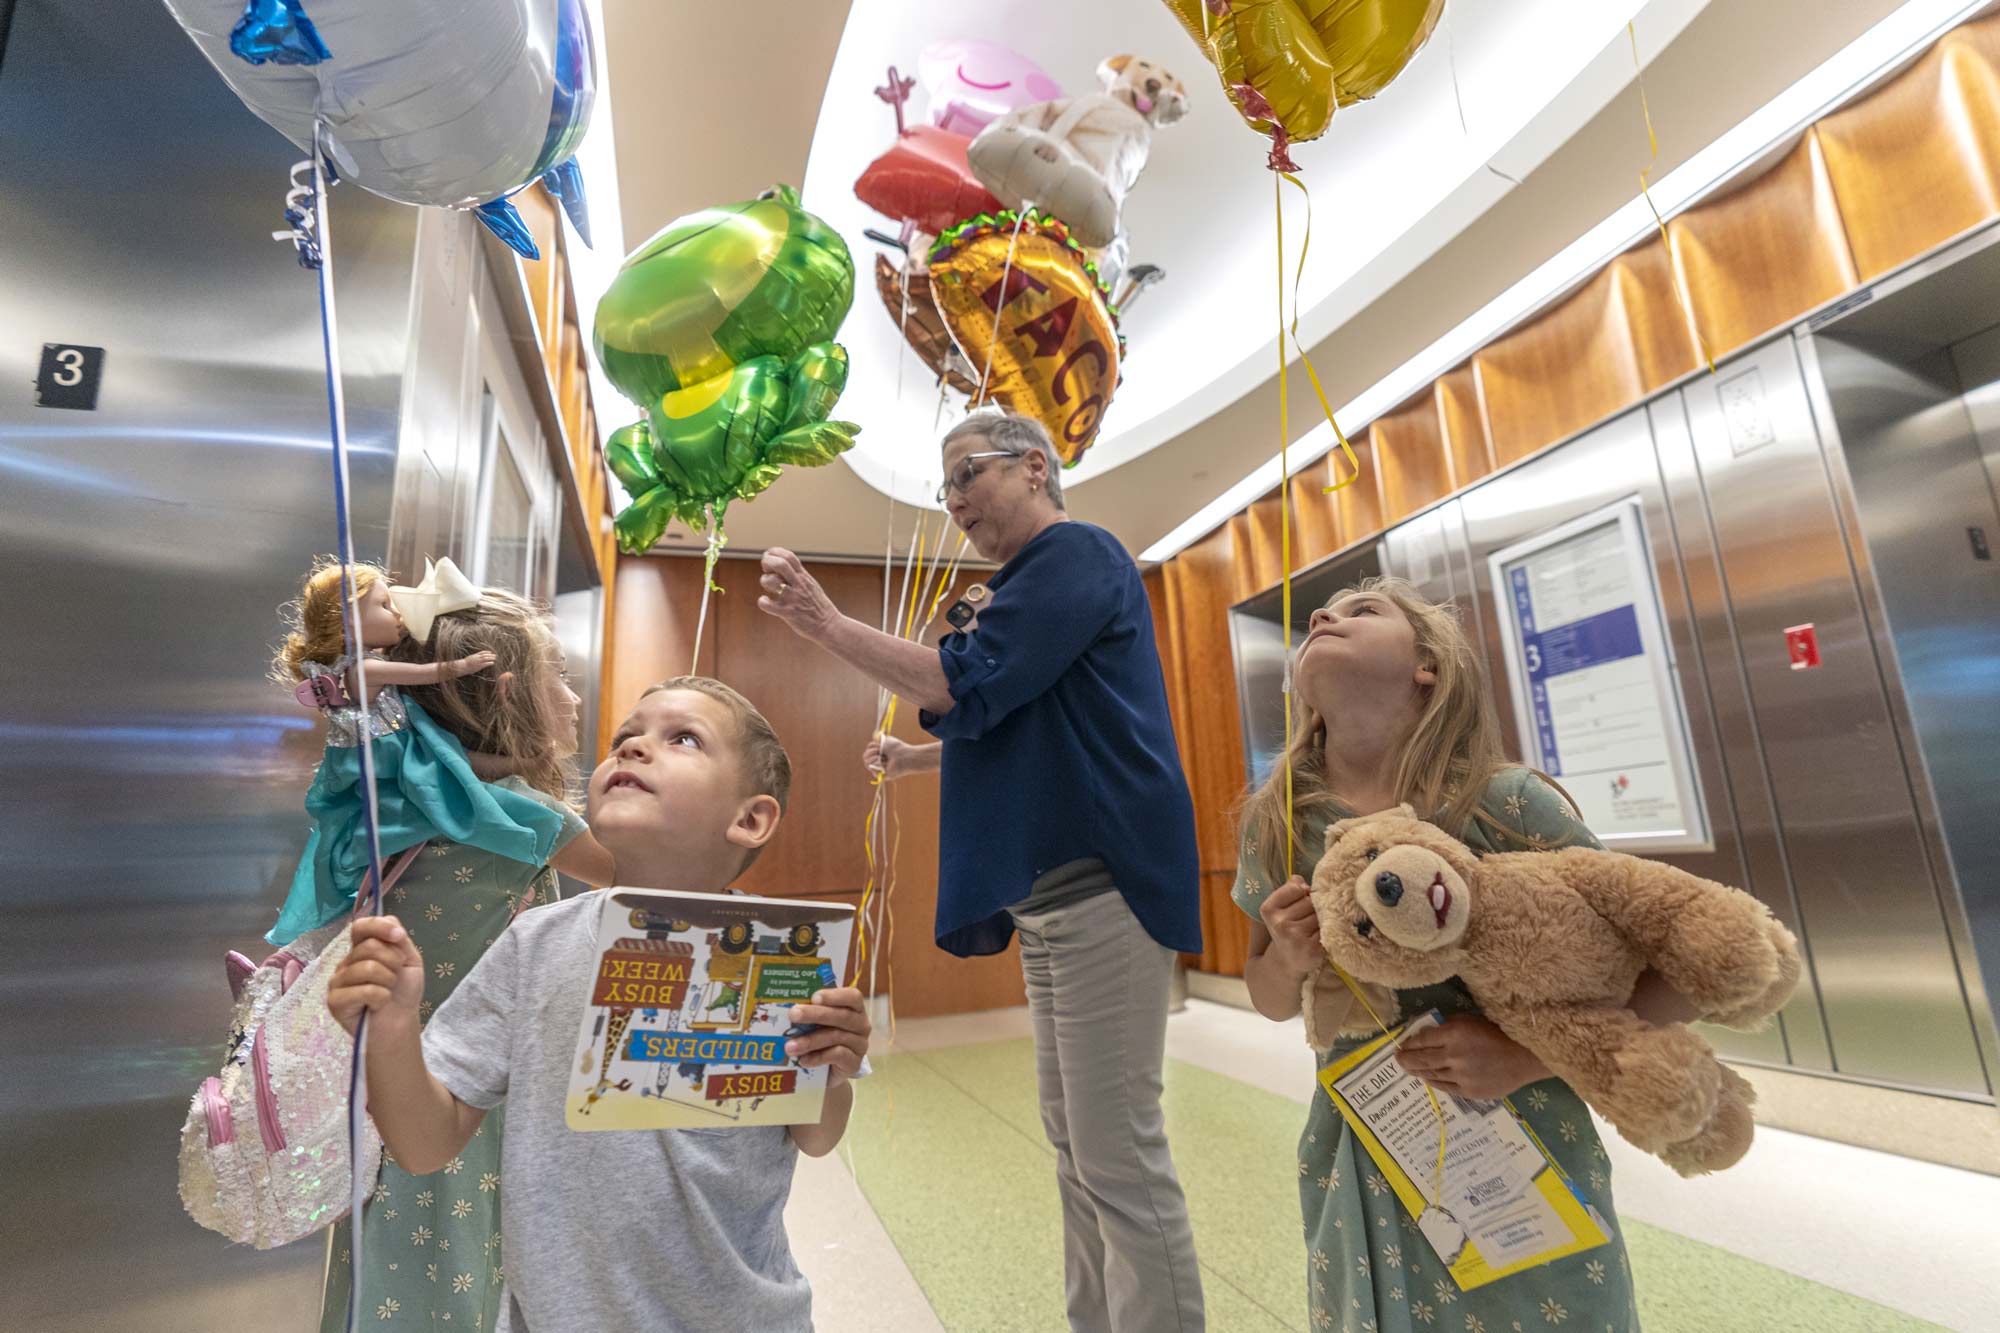 Joshua Leslie, foreground, admires his shark balloon with two friends who also hold balloons